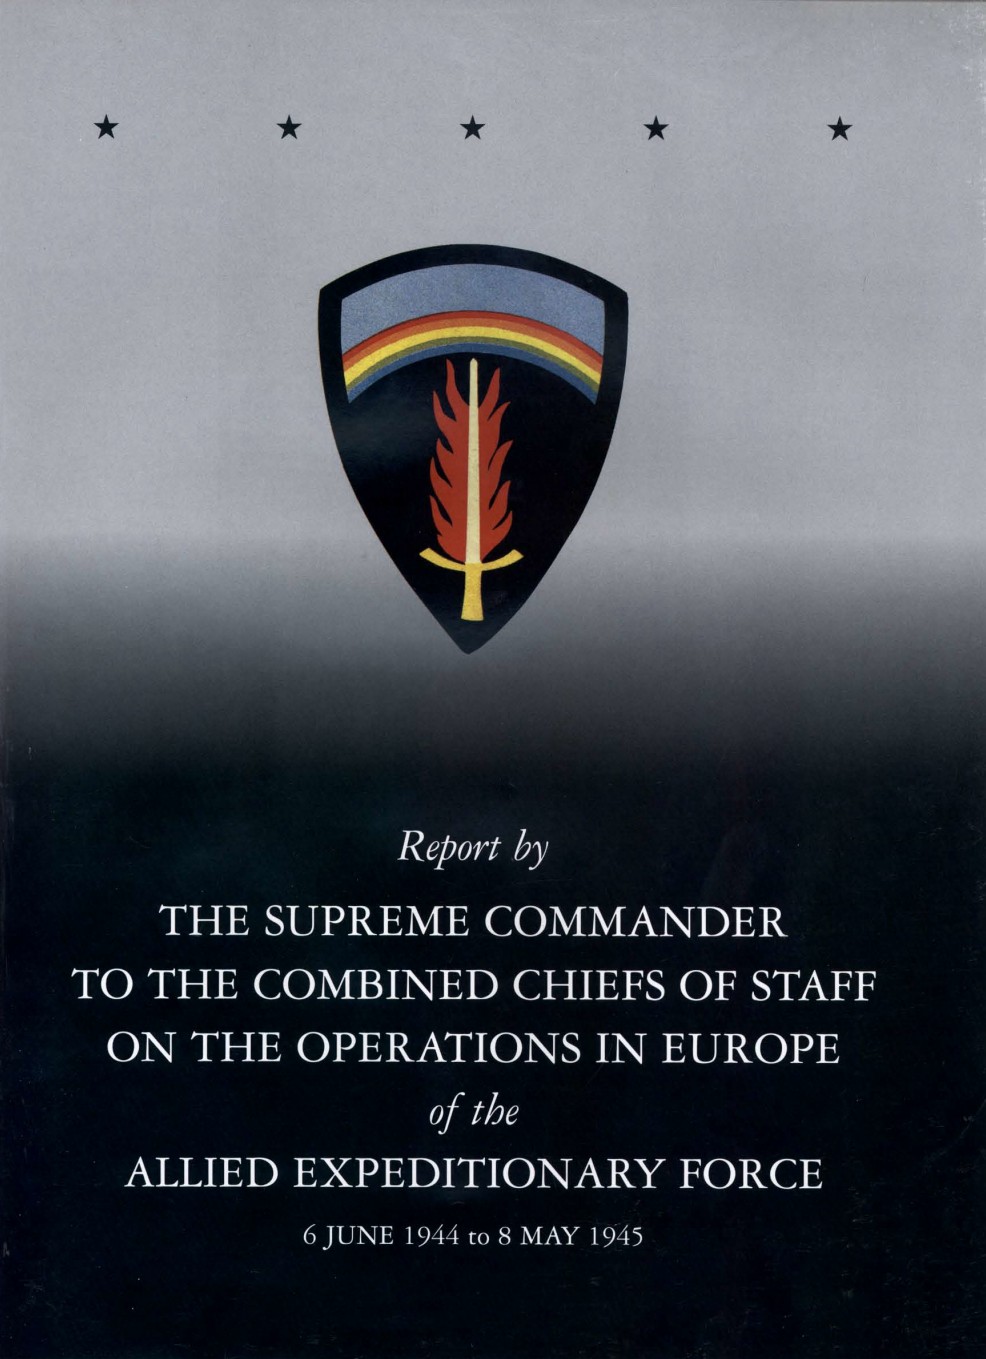 01 - USA - Dwight D. Eisenhower - Report by the Supreme Commander ...ed Expeditionary Force, 6 June 1944 to 8 May 1945 1994.jpg